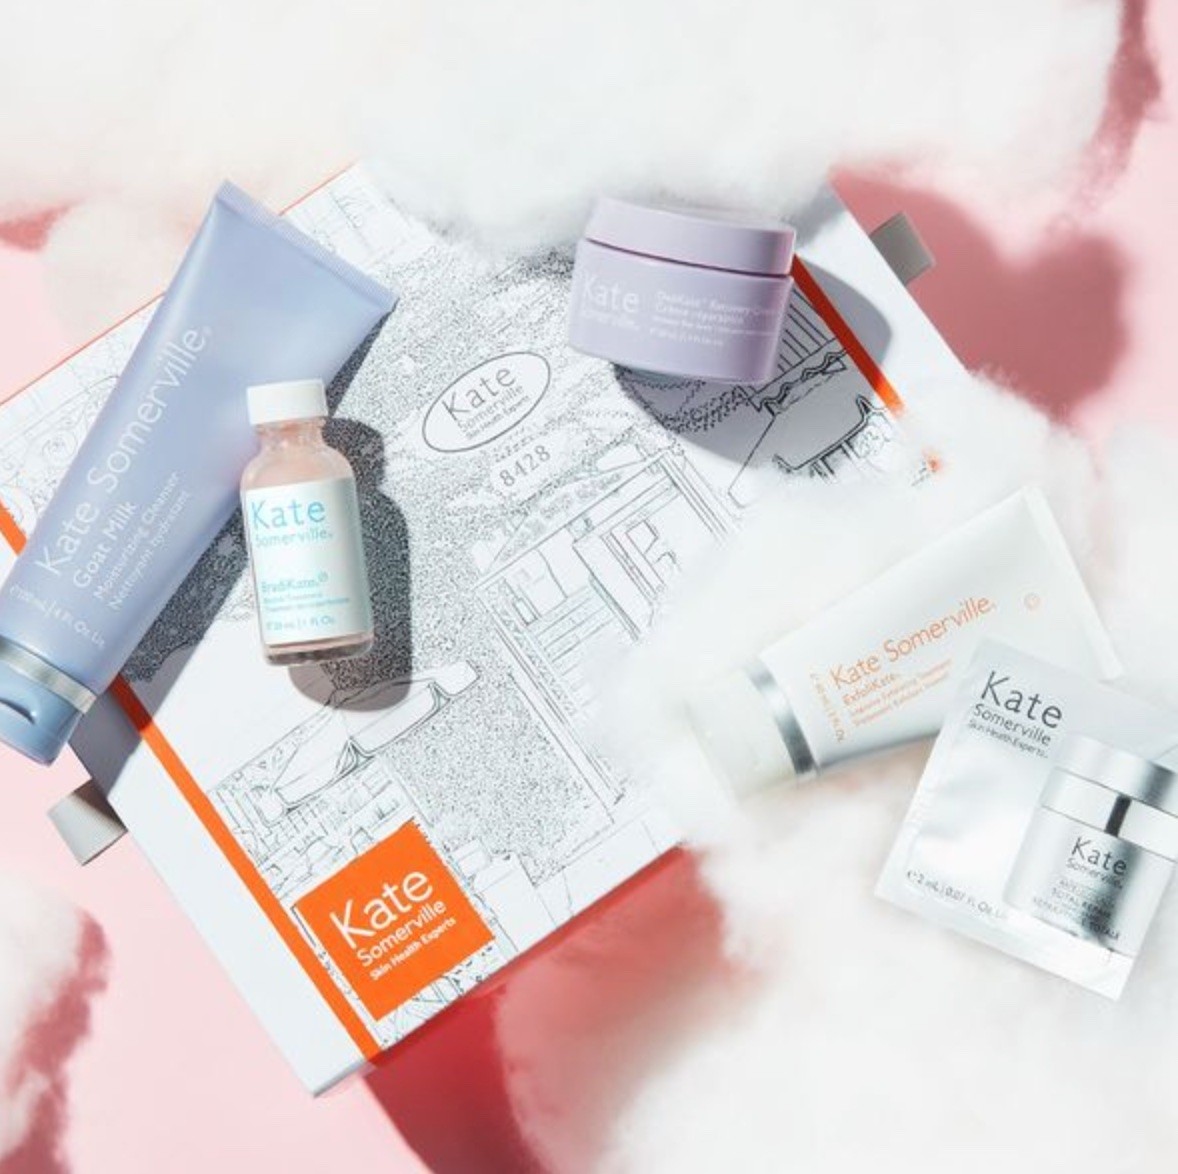 LookFantastic X Kate Somerville Limited Edition Box